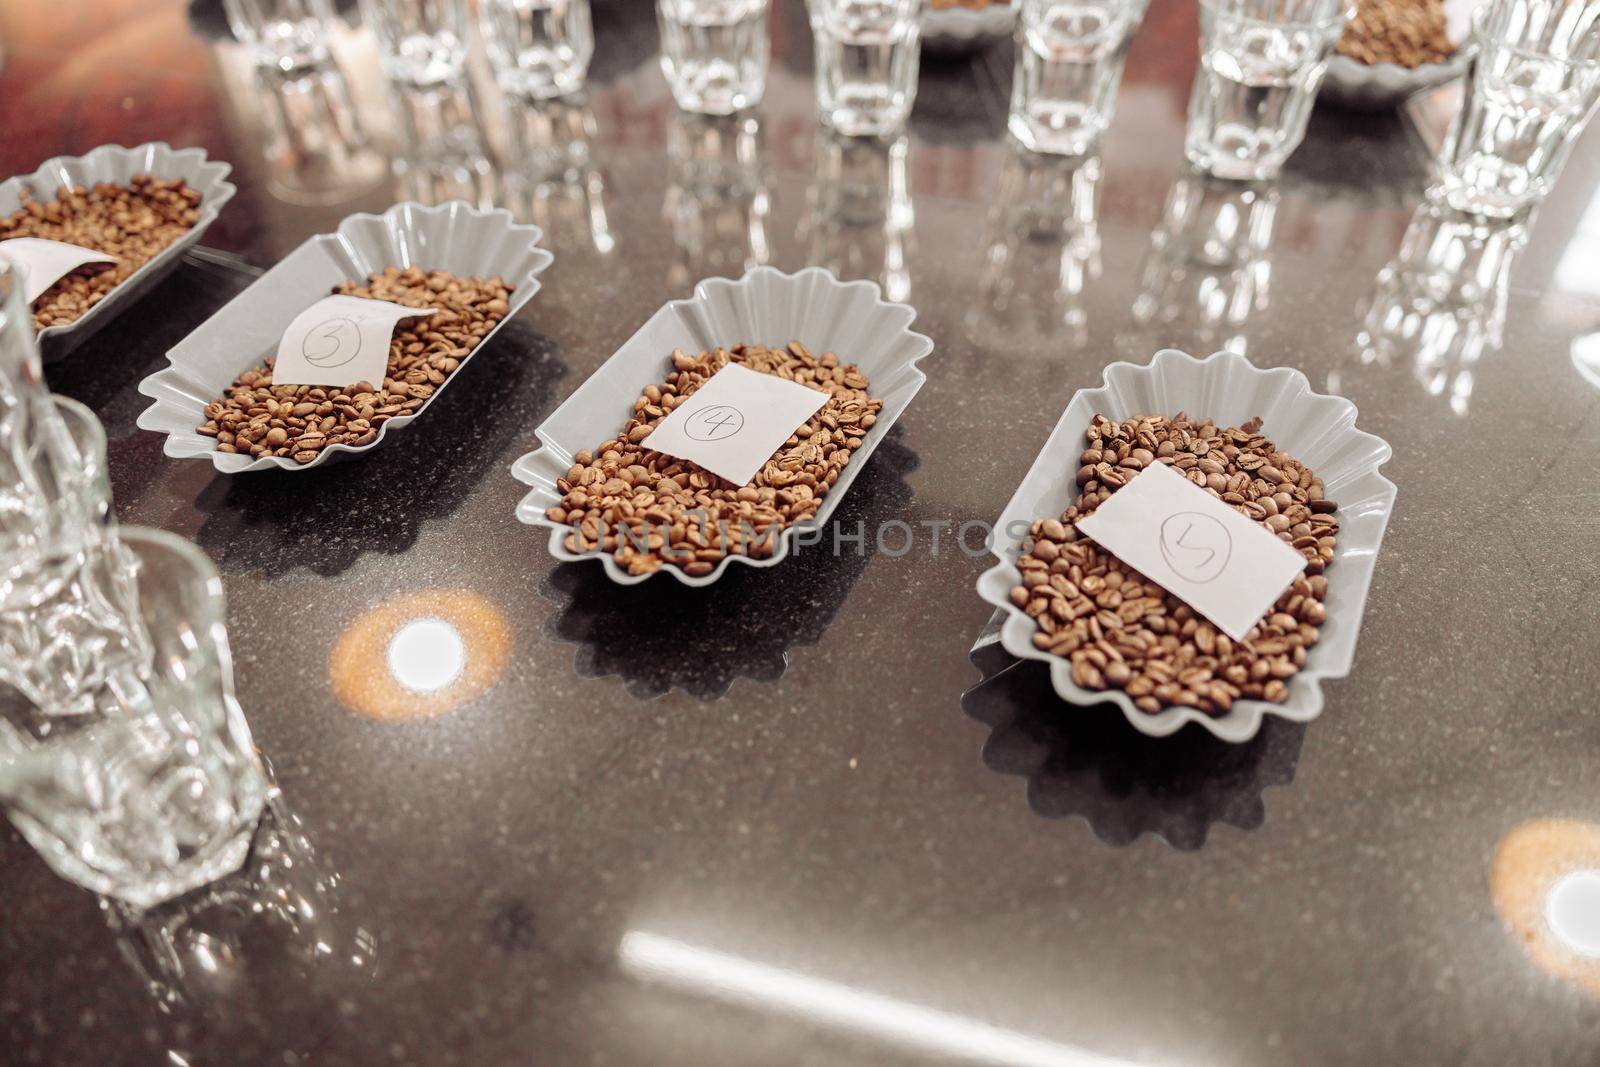 Many water glasses and bowls with coffee beans on the table for tasting by Yaroslav_astakhov